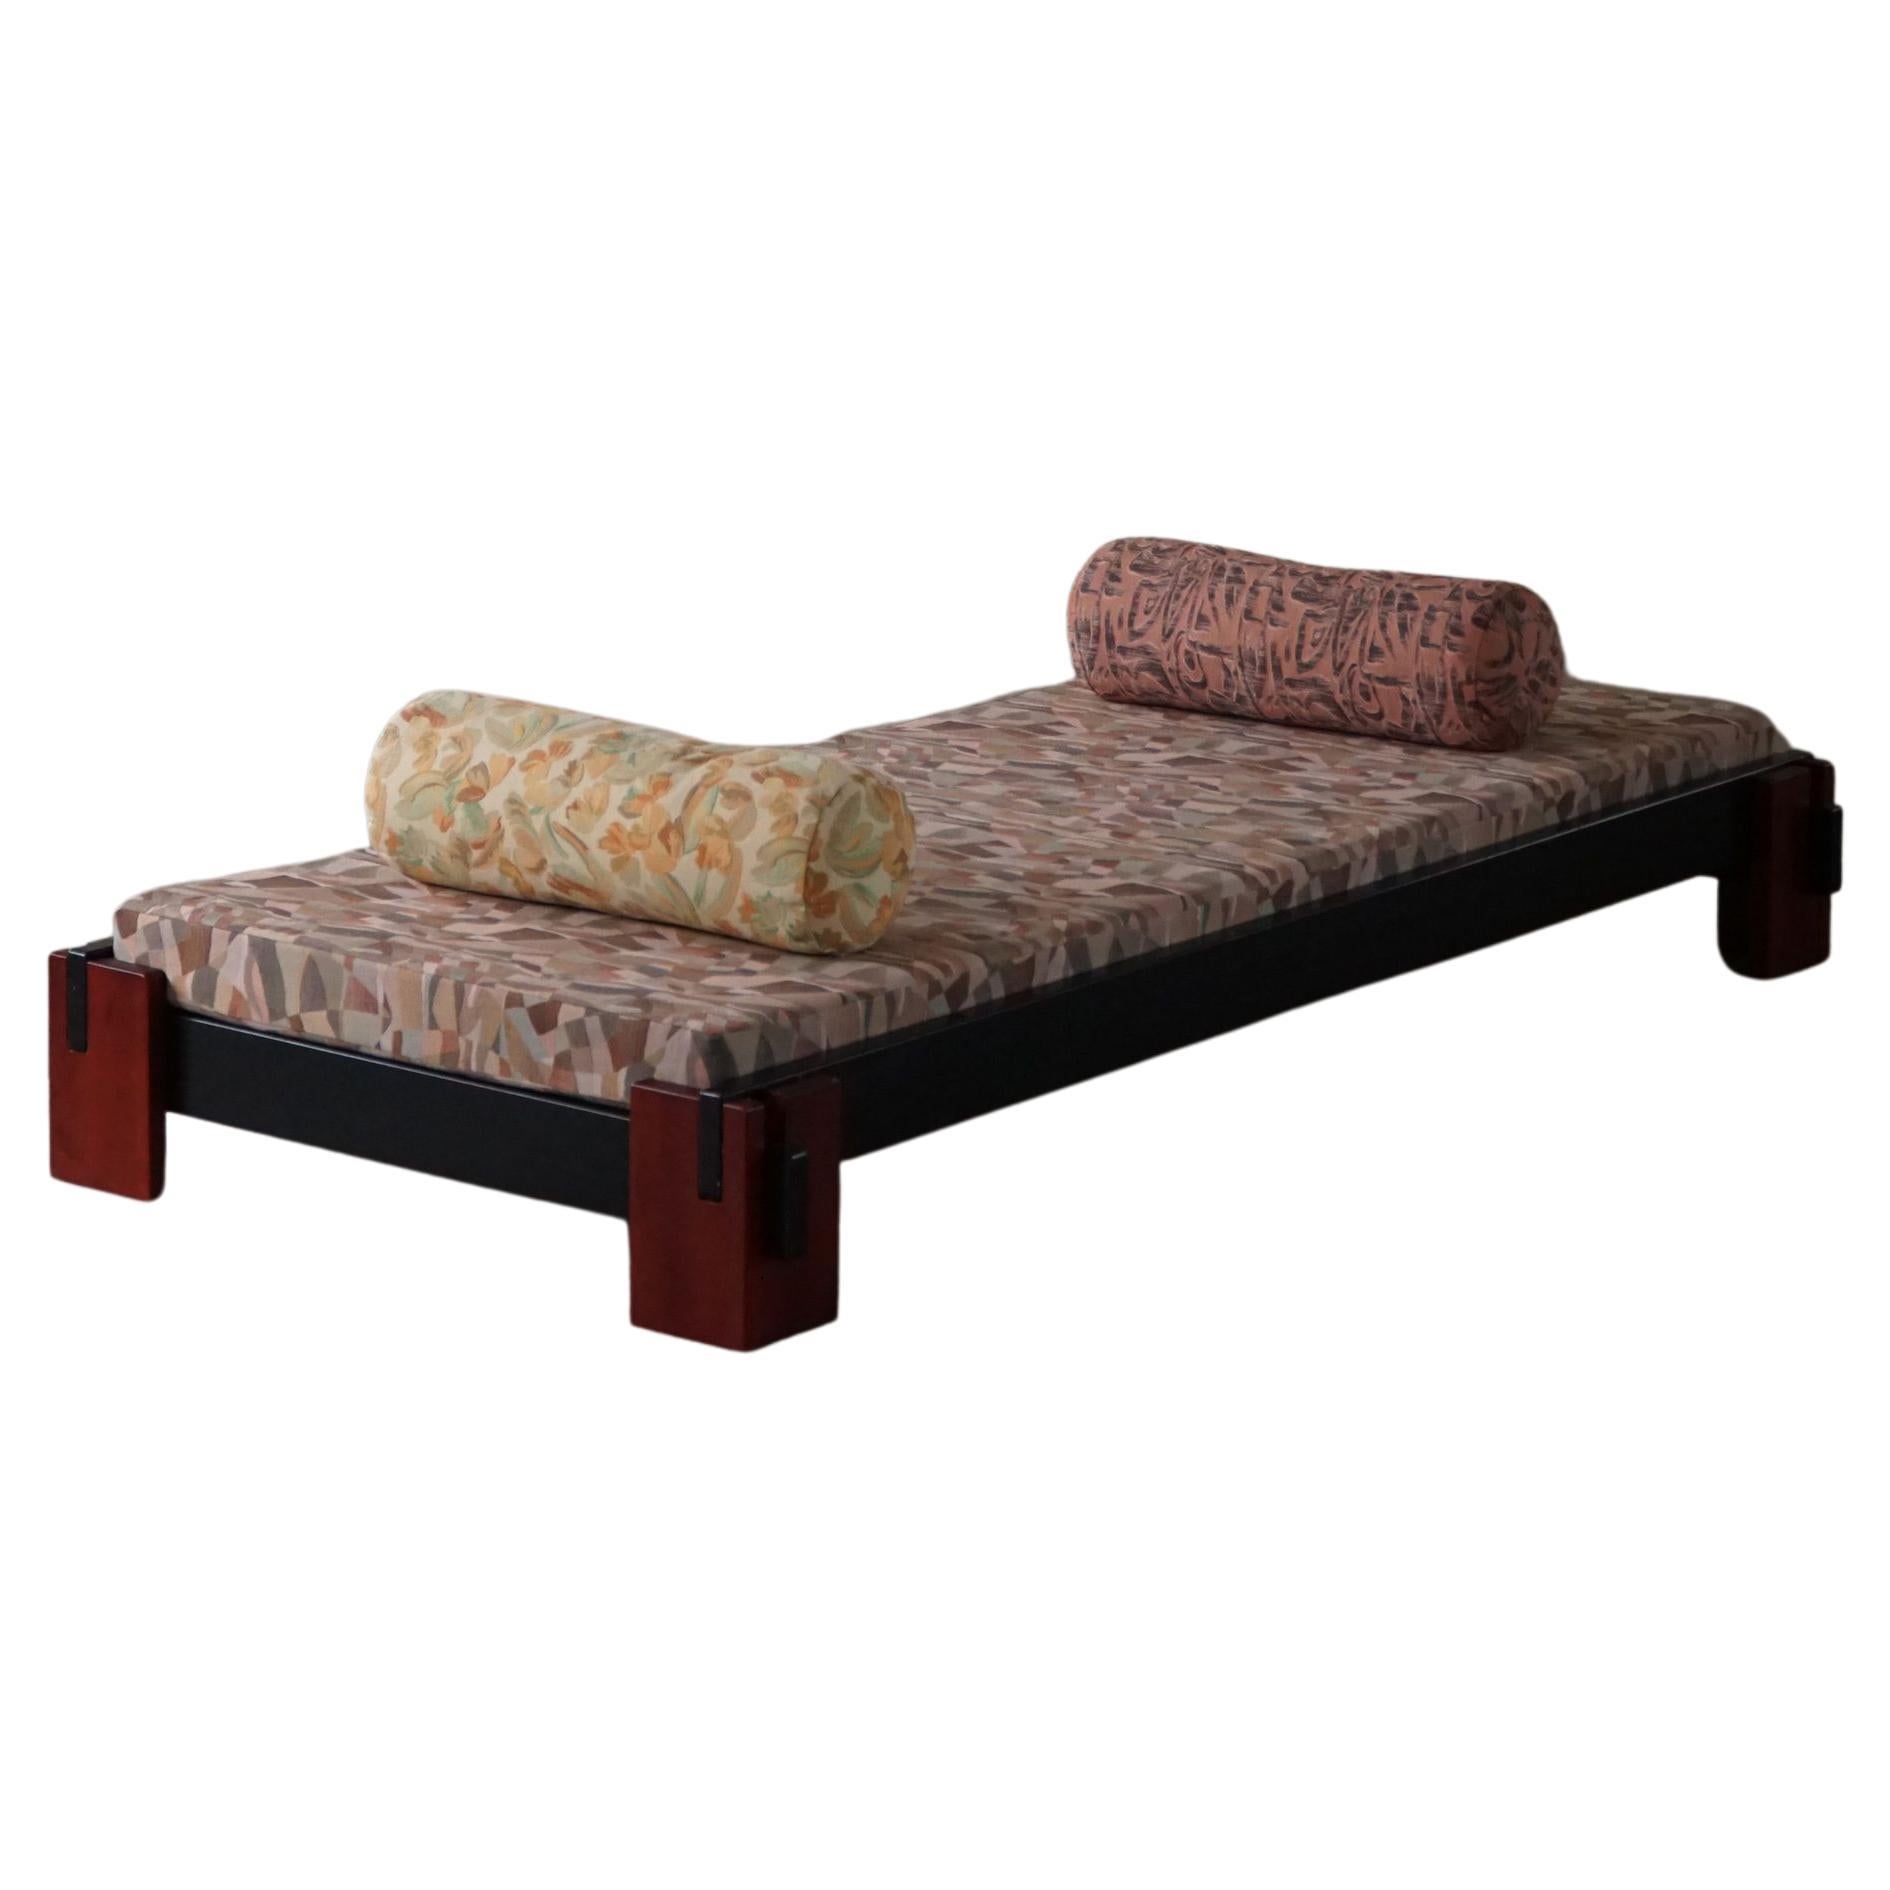 Danish Modern, Minimalist Daybed Reupholstered in Vintage Fabric, Made in 1980s For Sale